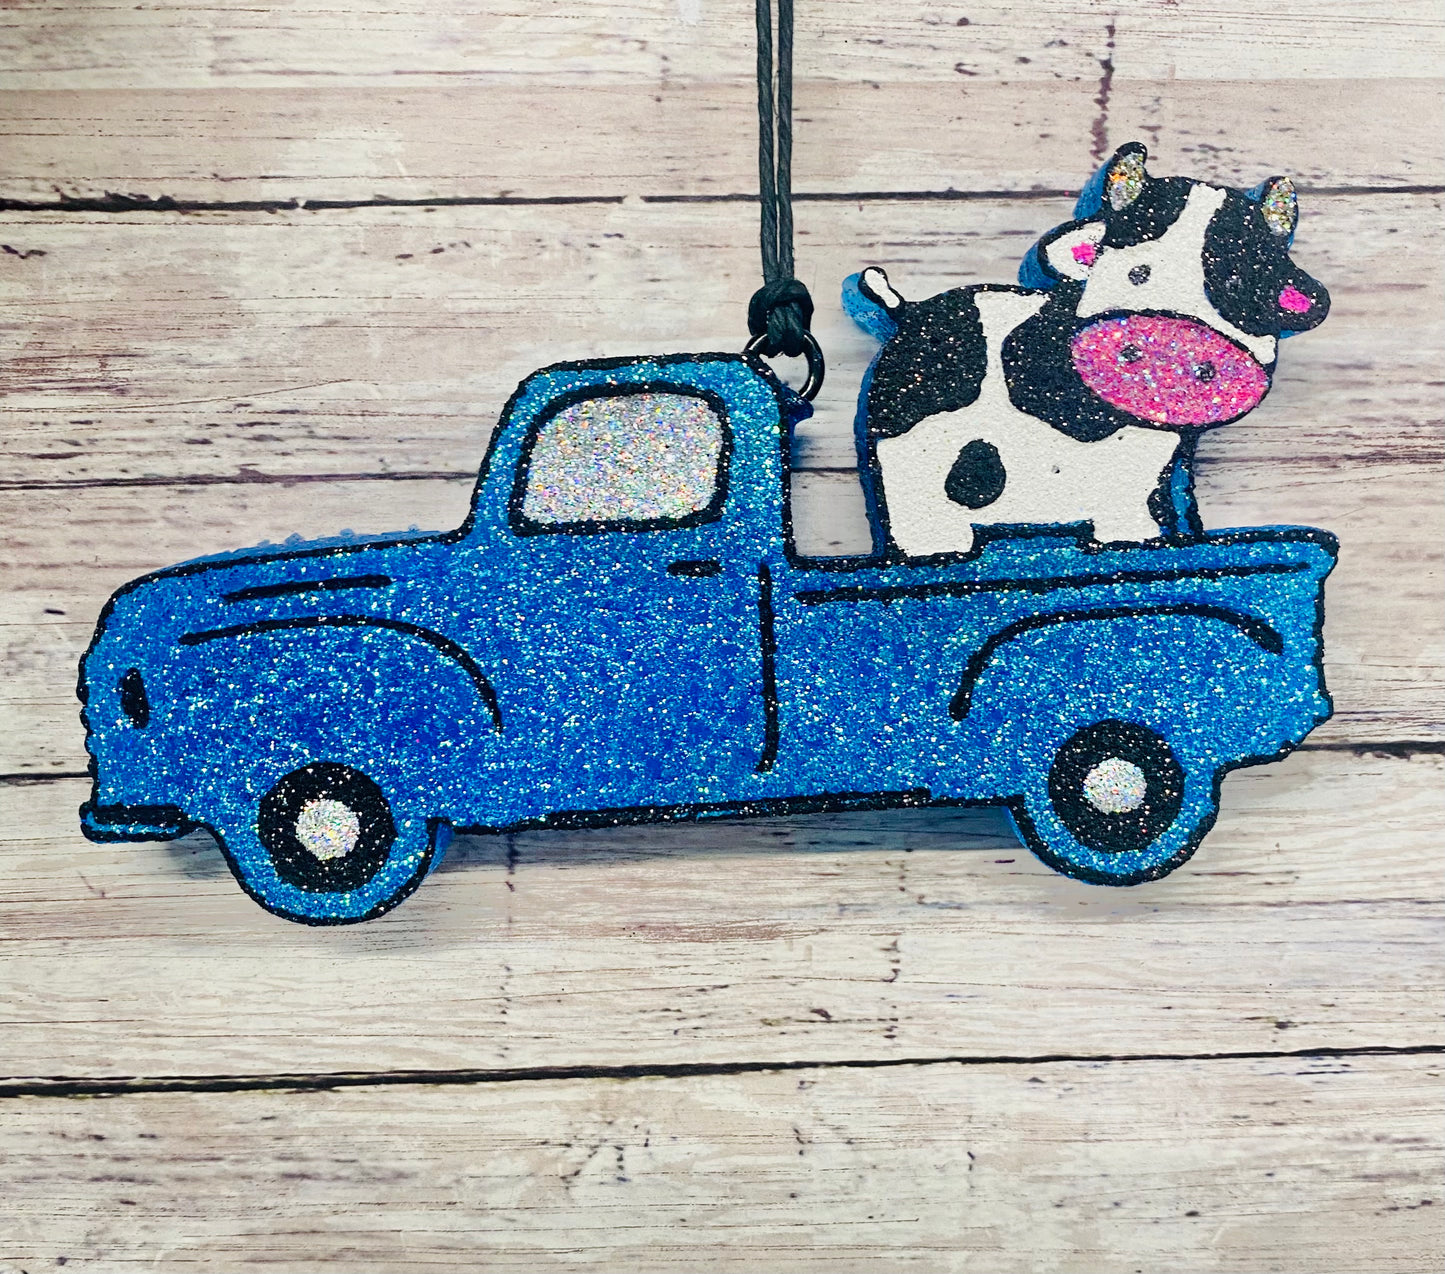 Truck with cow